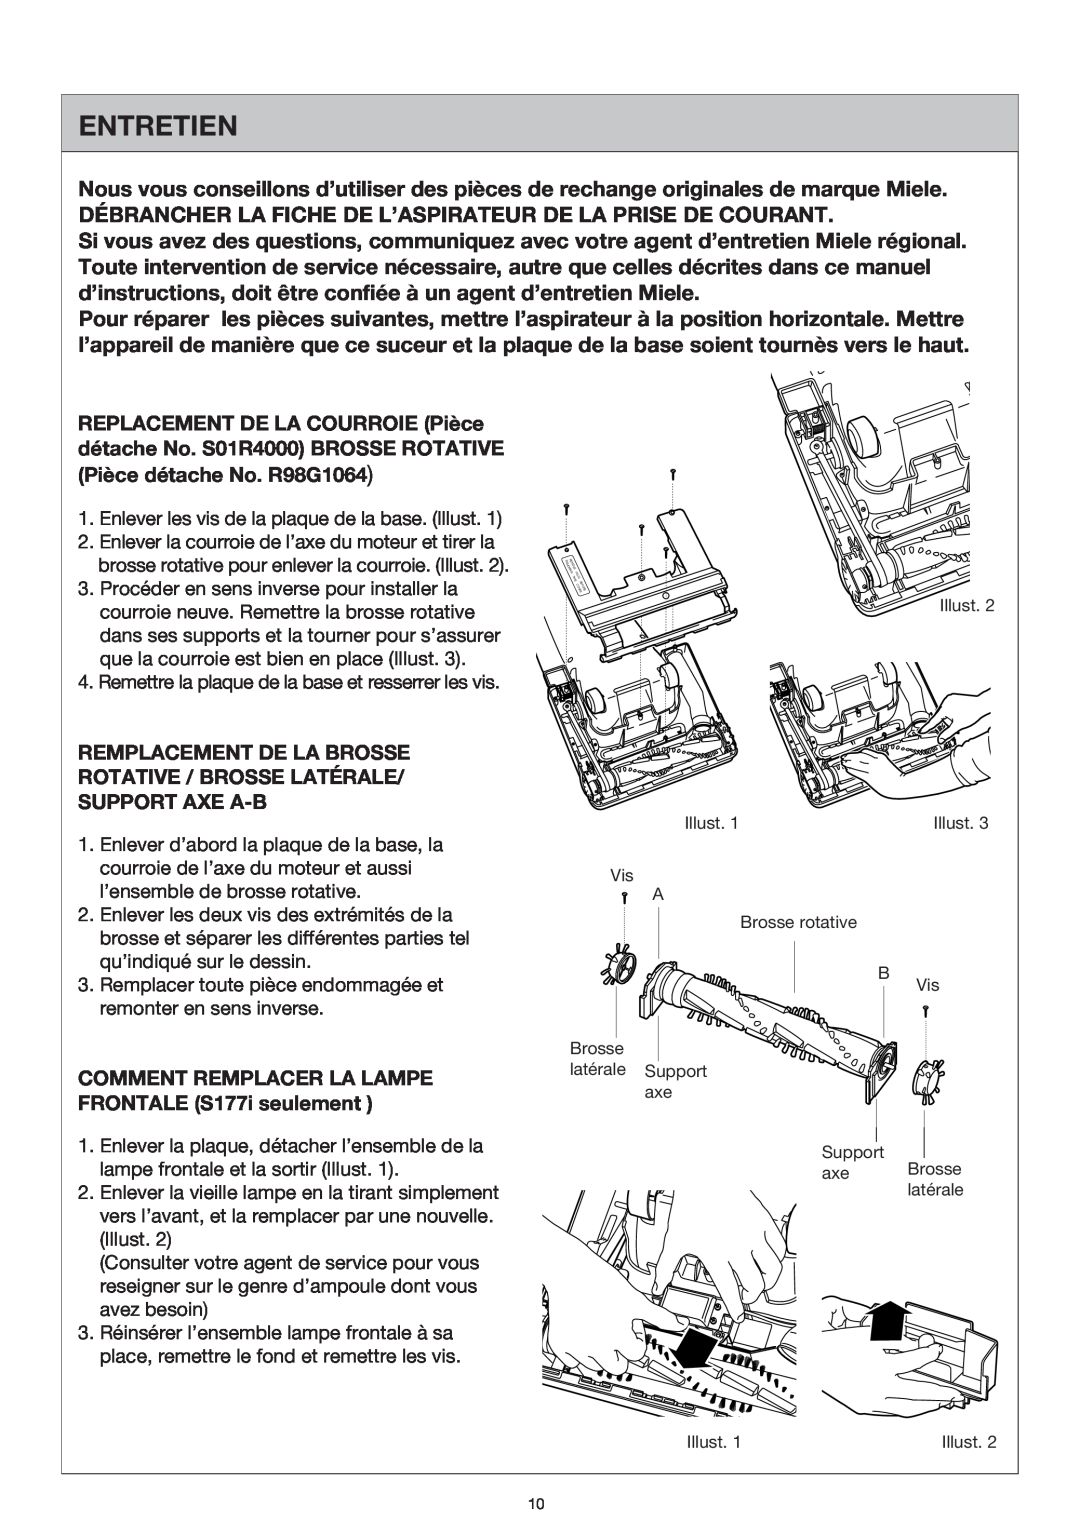 Miele S177i, S176i important safety instructions Entretien 